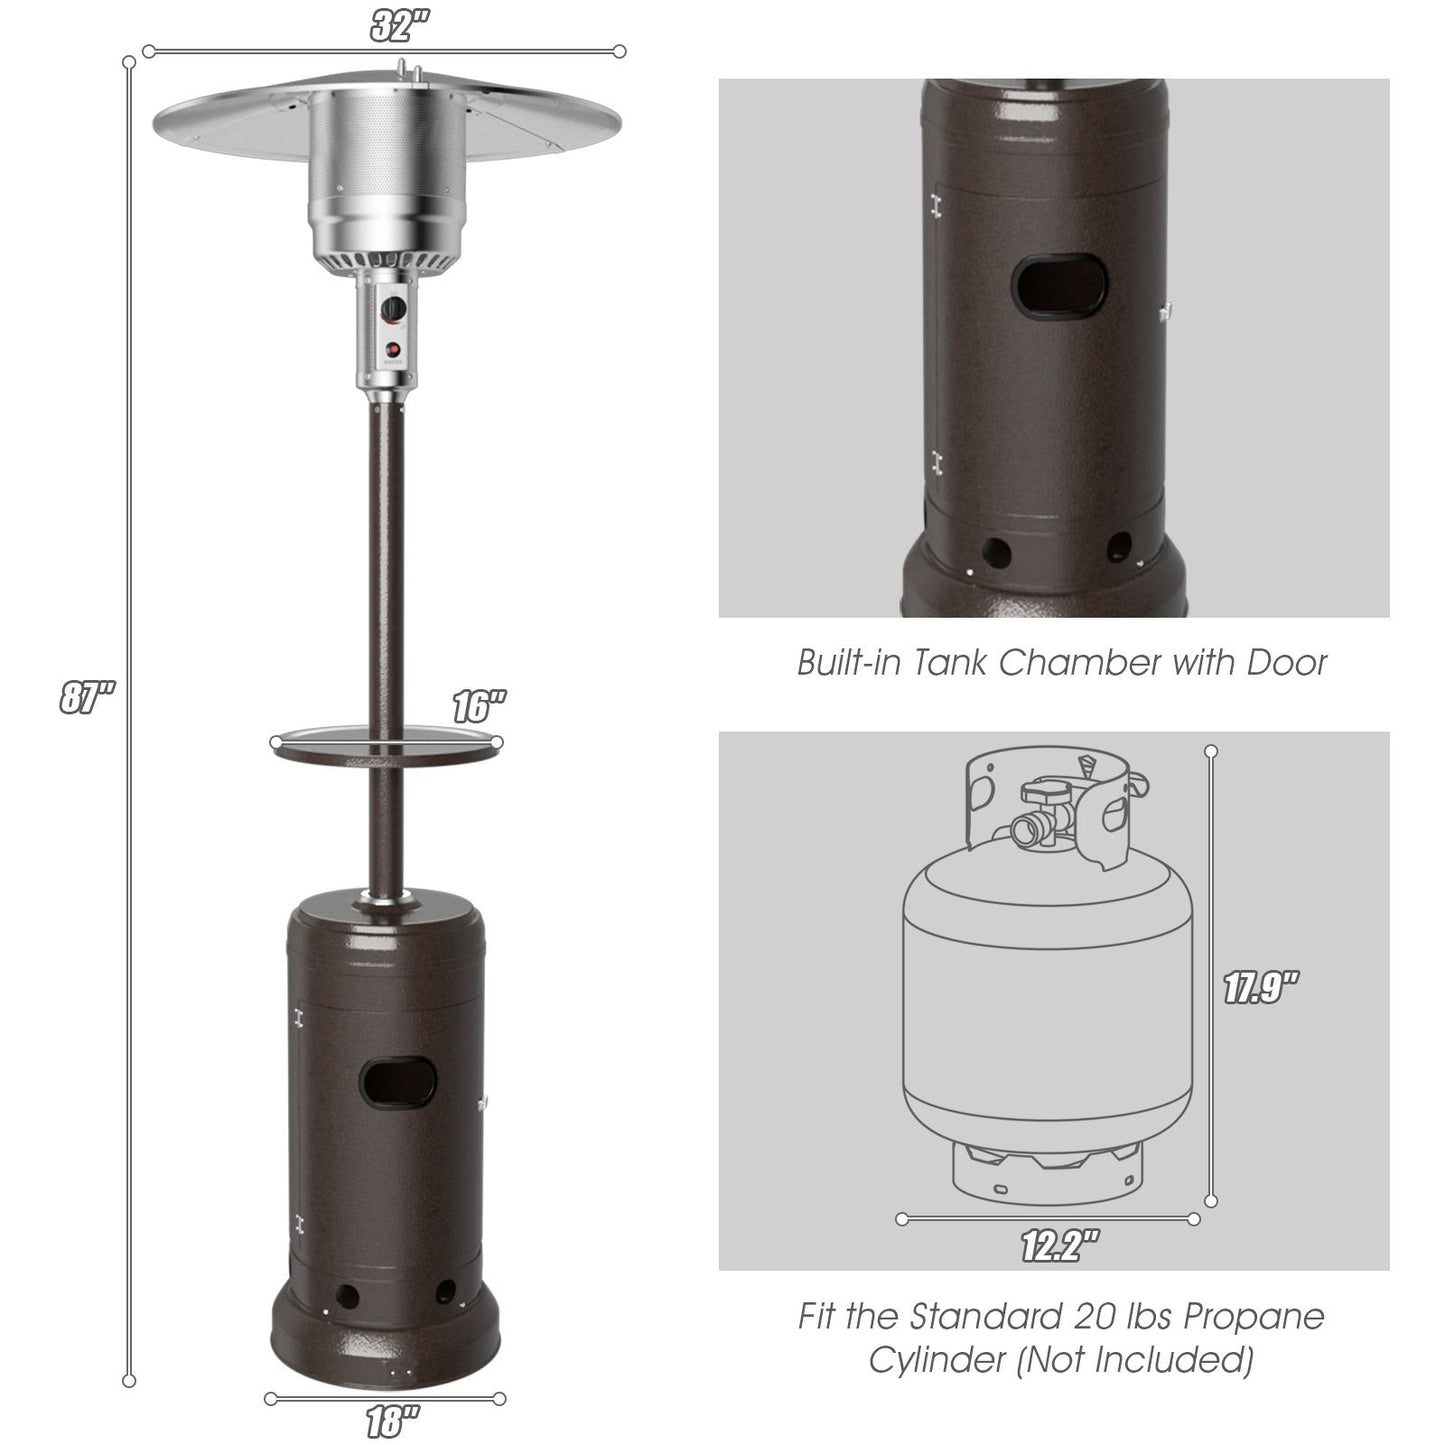 Outdoor Heater Propane Standing LP Gas Steel with Table & Wheels, Brown